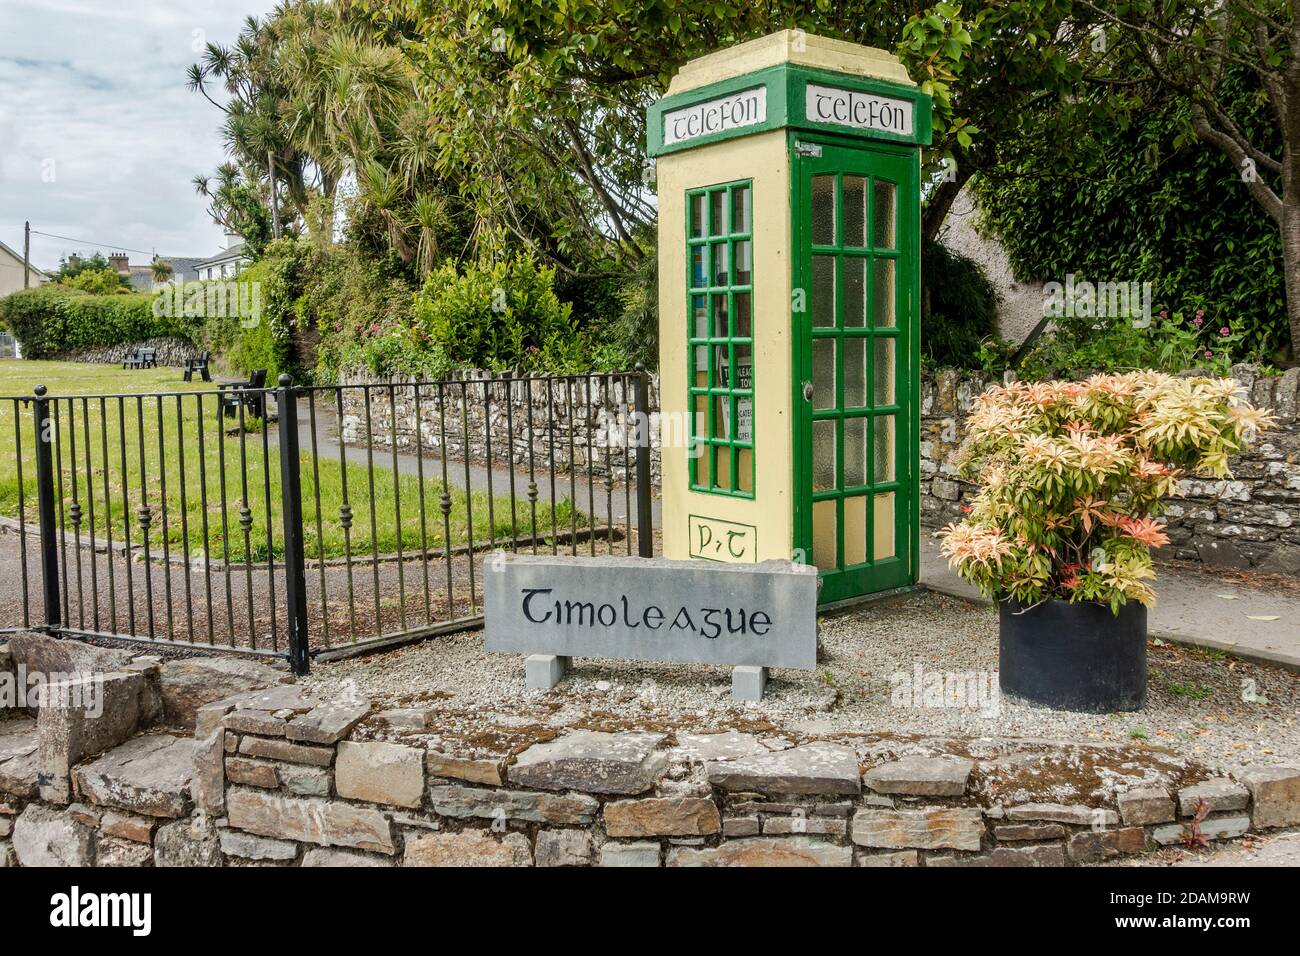 Old style telephone box and Timoleague sign in Timoleague, West Cork, Ireland. Stock Photo